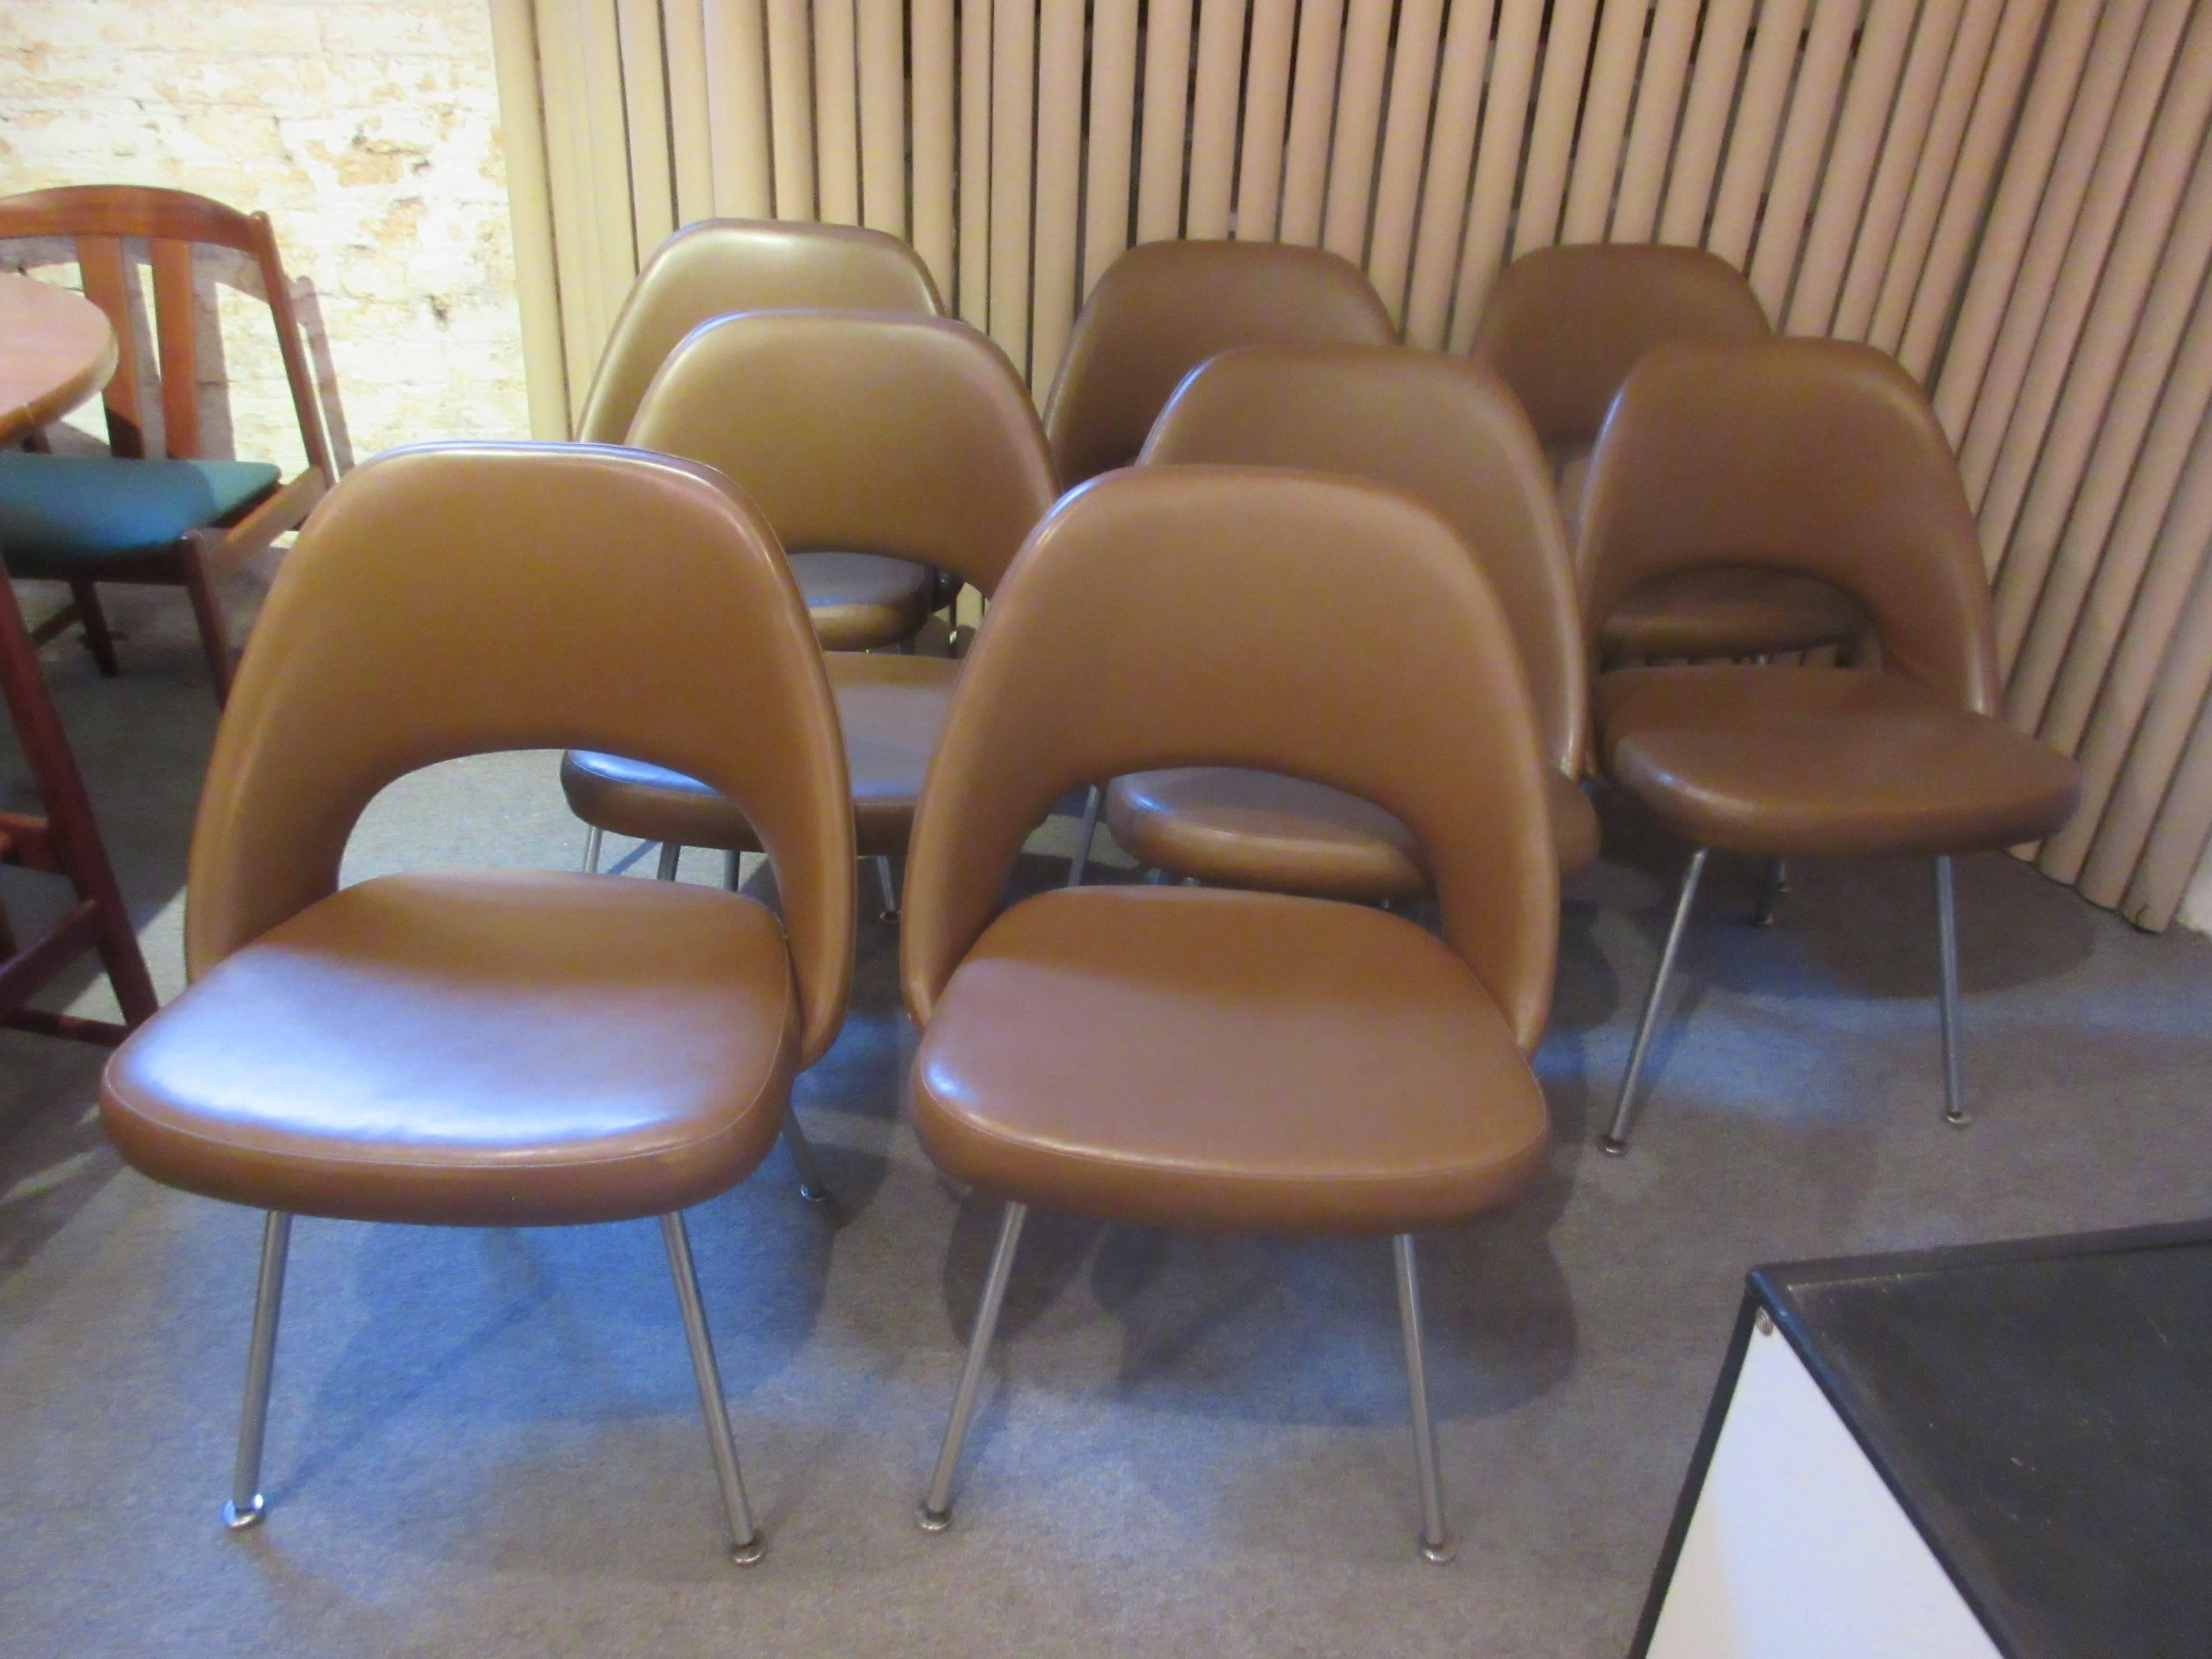 4 matching dining chairs in a greenish pond sludge brown vinyl. Some retain Knoll tags. All original.